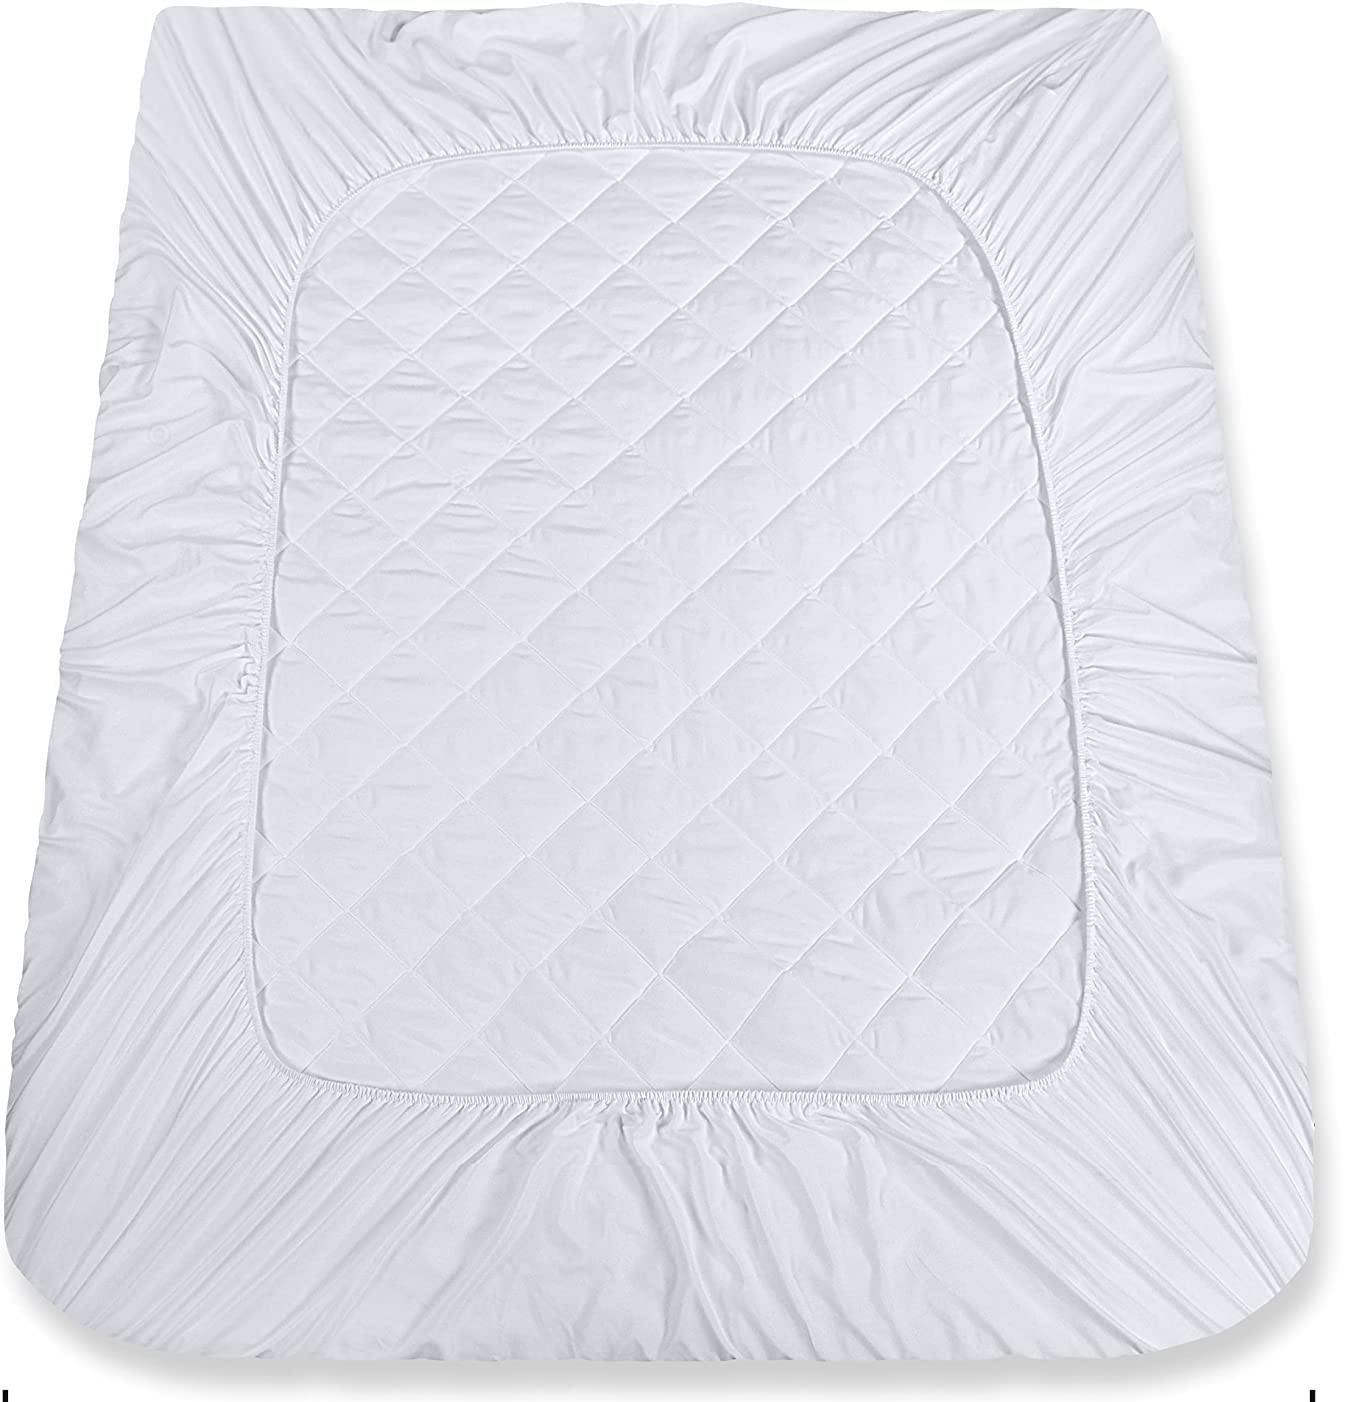 Cot Size Mattress Pad Waterproof Quilted,Cotton Top Soft Protector Cover Quilted Fitted Mattress ProtectorFits Narrow Twin/Camp Bunk/Rvs Bunk/Guest Beds 30" X 75" X 10"